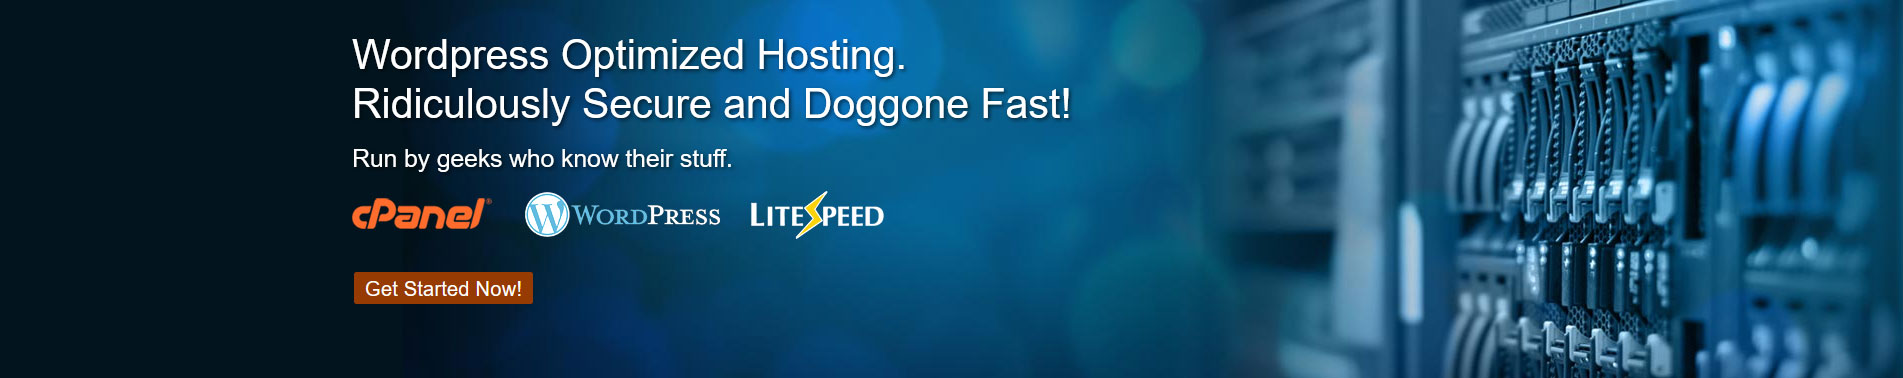 Wordpress Optimized Hosting. Ridiculously Secure and Doggone Fast!